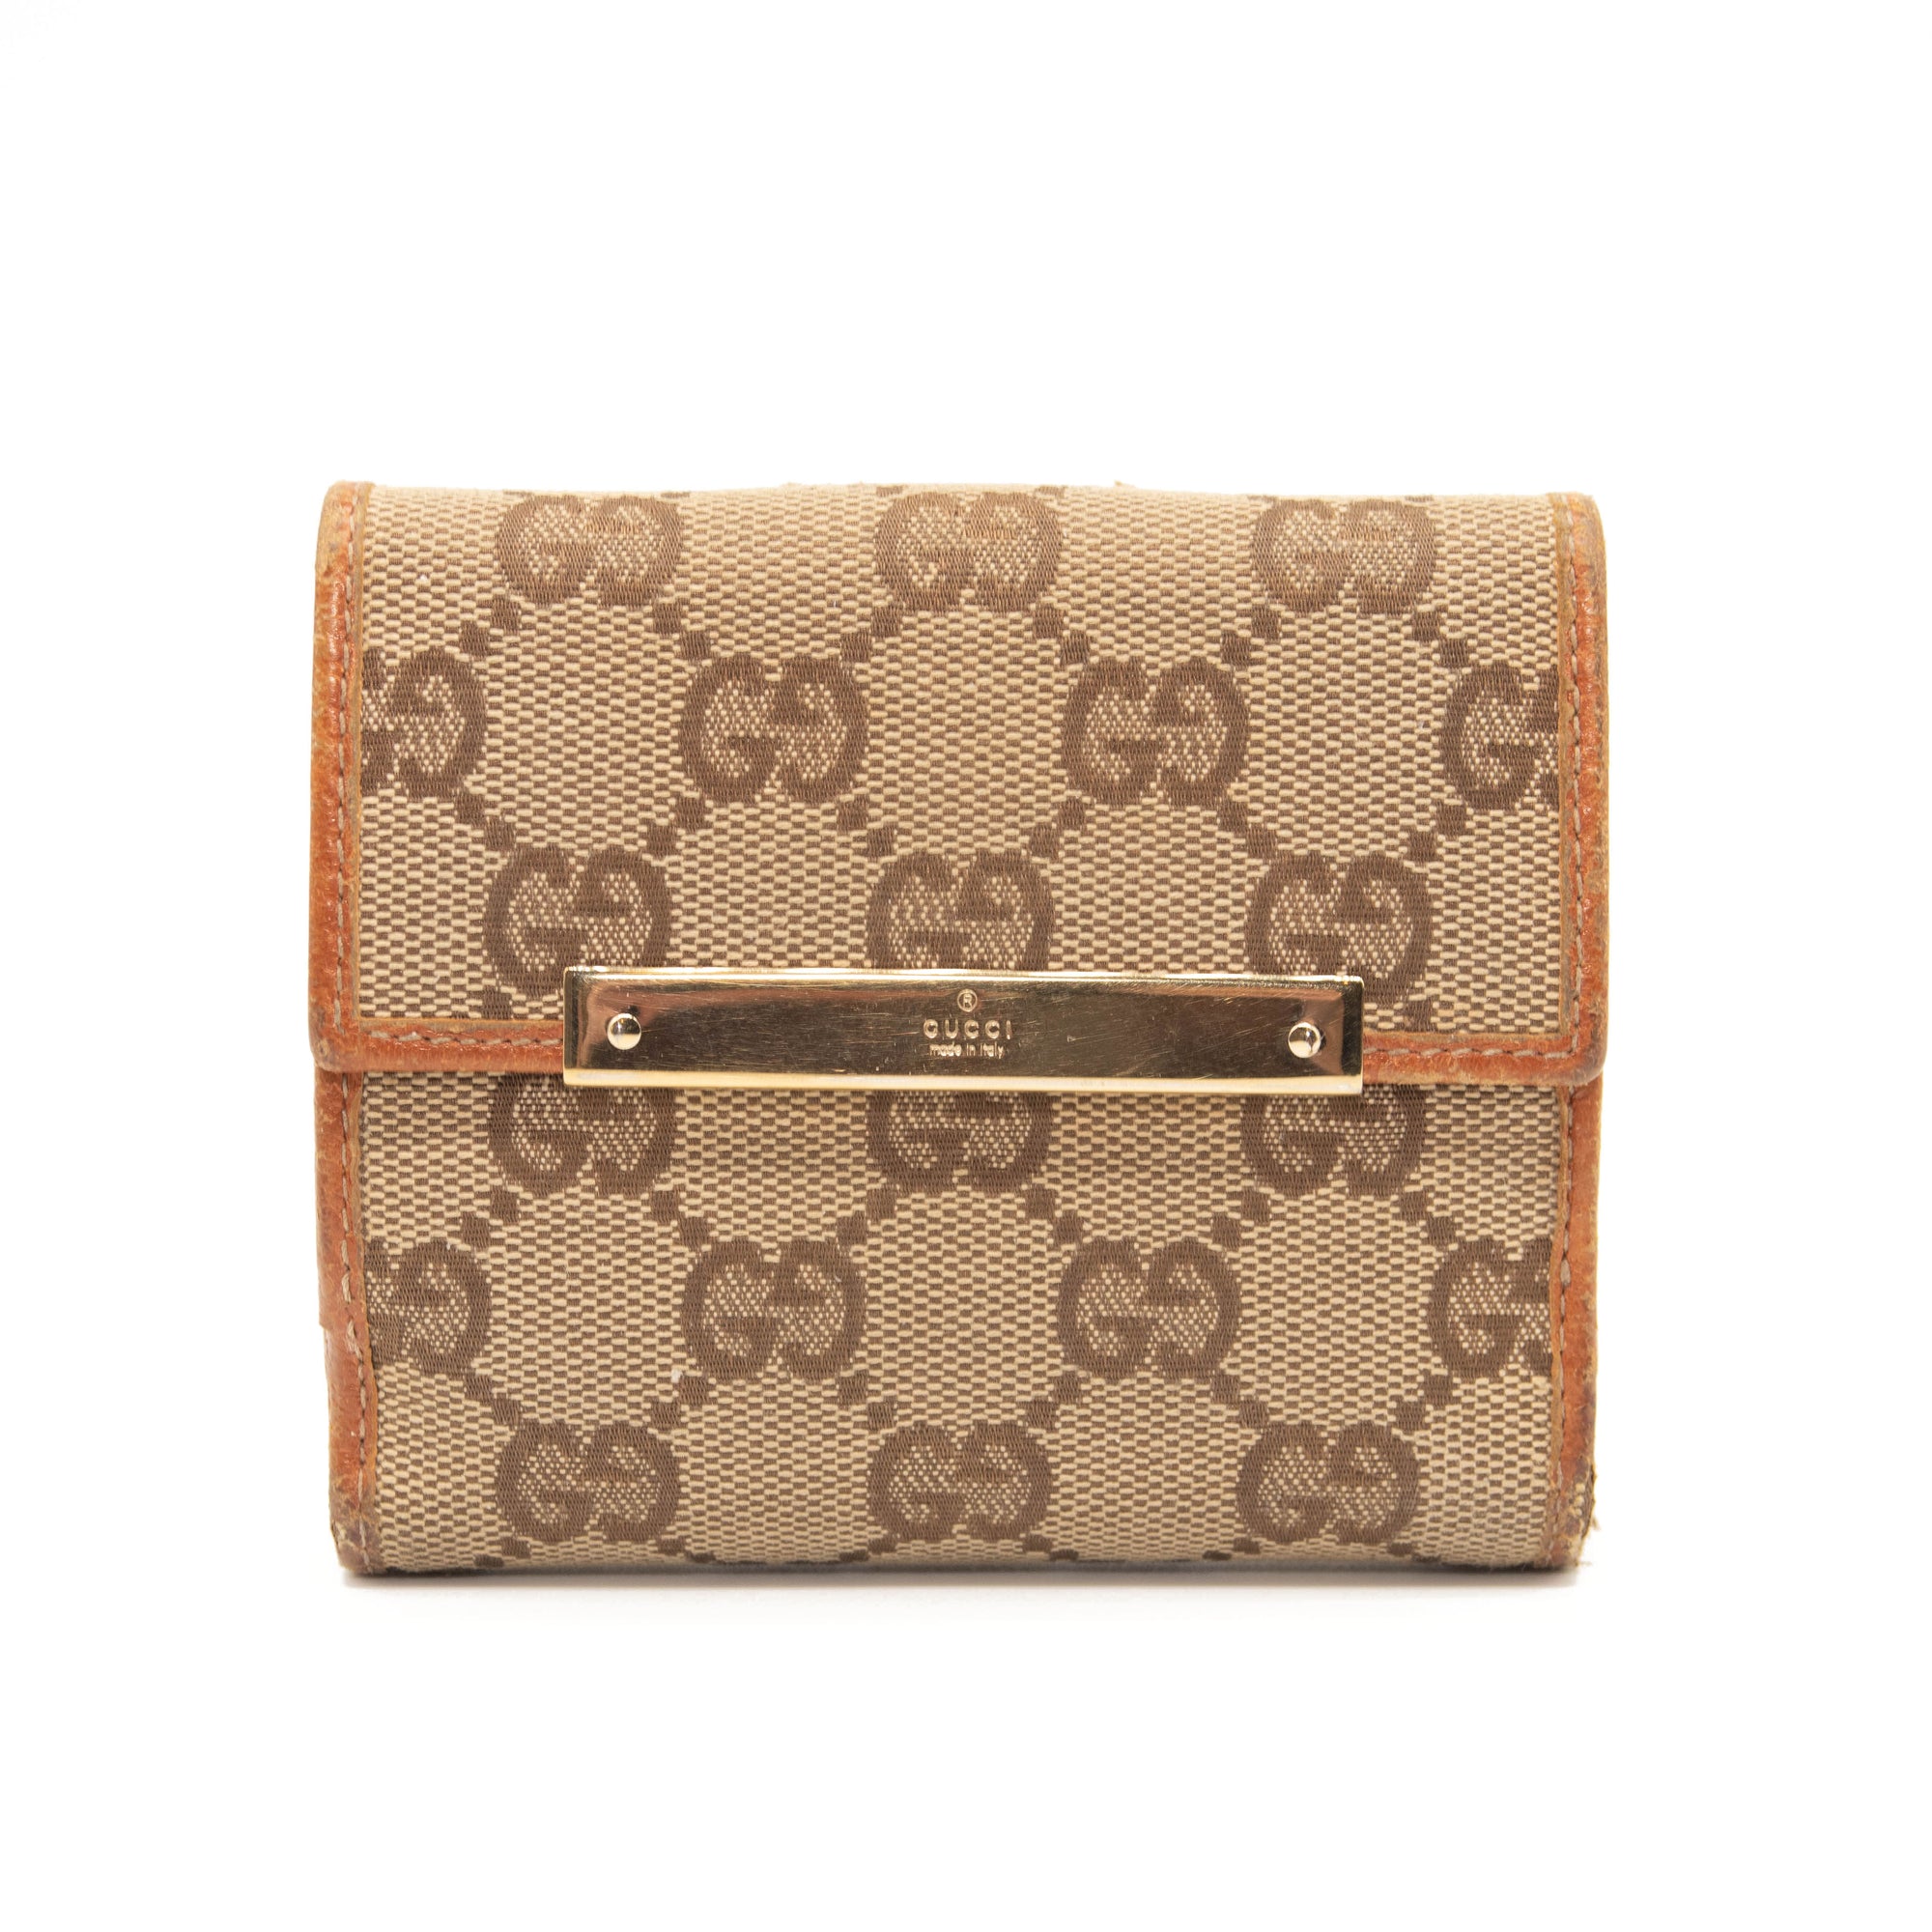 kan opfattes Alternativ magasin Gucci Orange/Beige/Ebony GG Canvas and Leather French Flap Wallet -  MyDesignerly